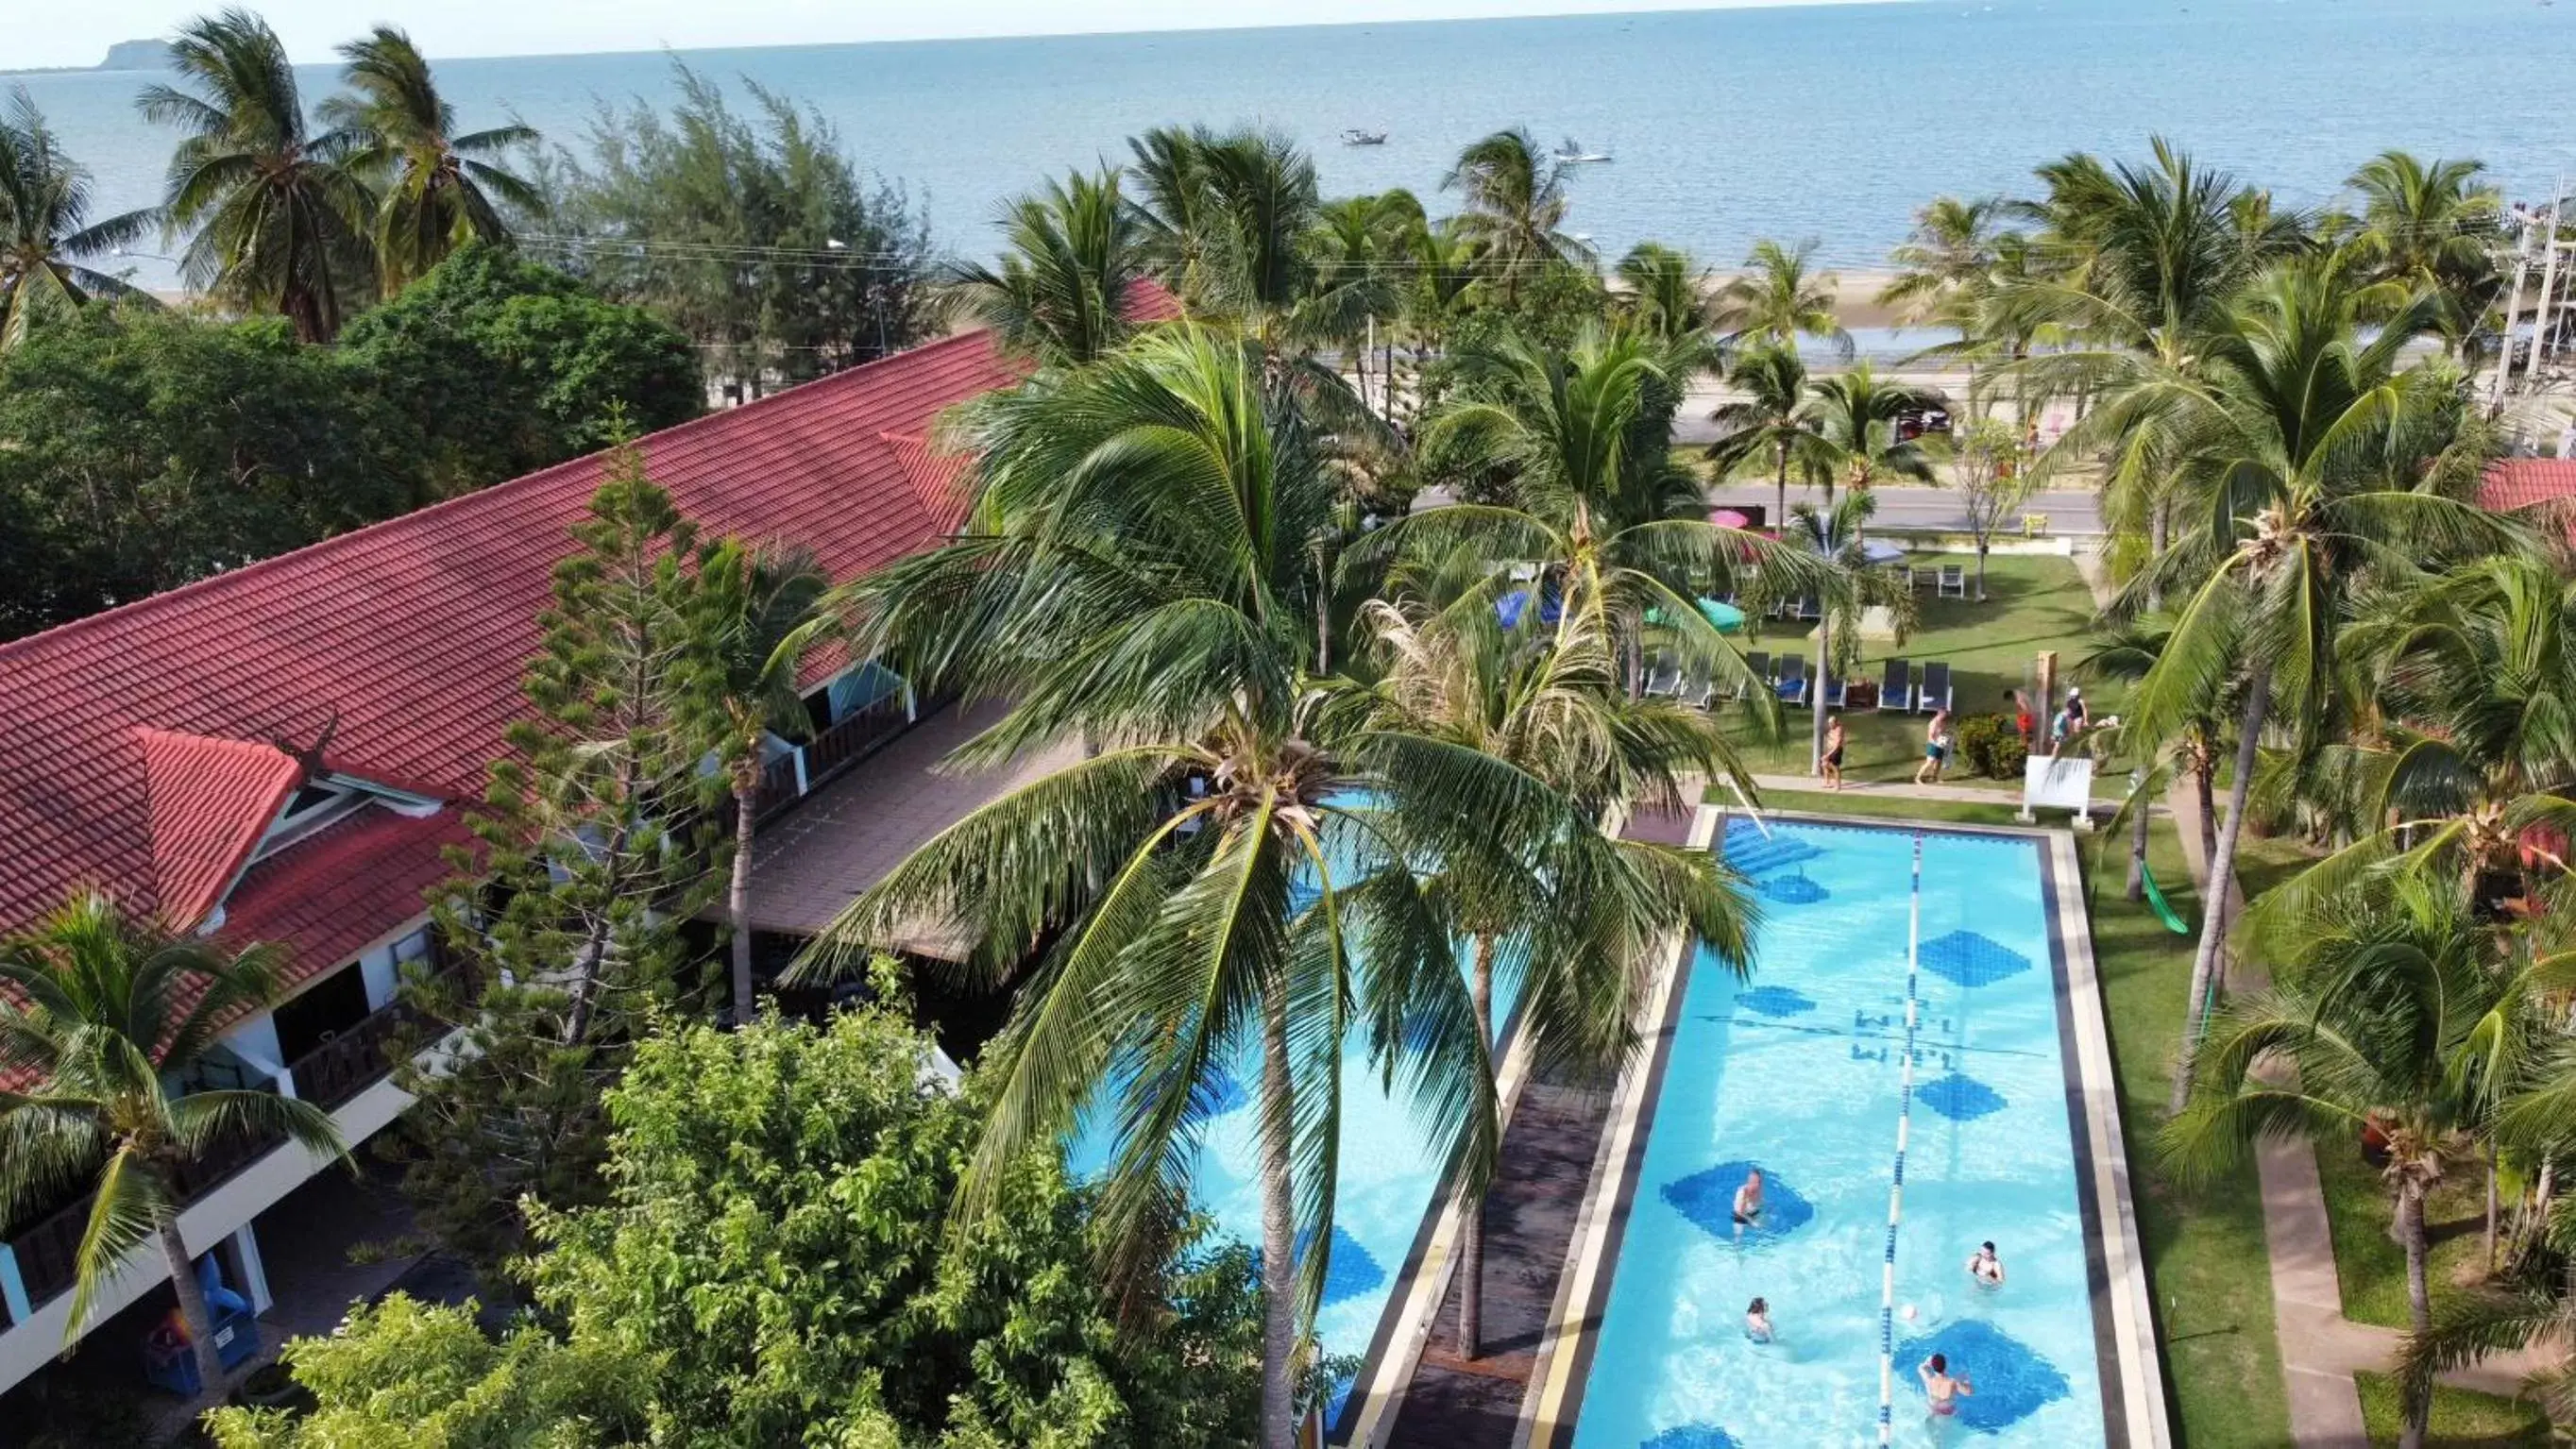 Property building, Pool View in Dolphin Bay Beach Resort